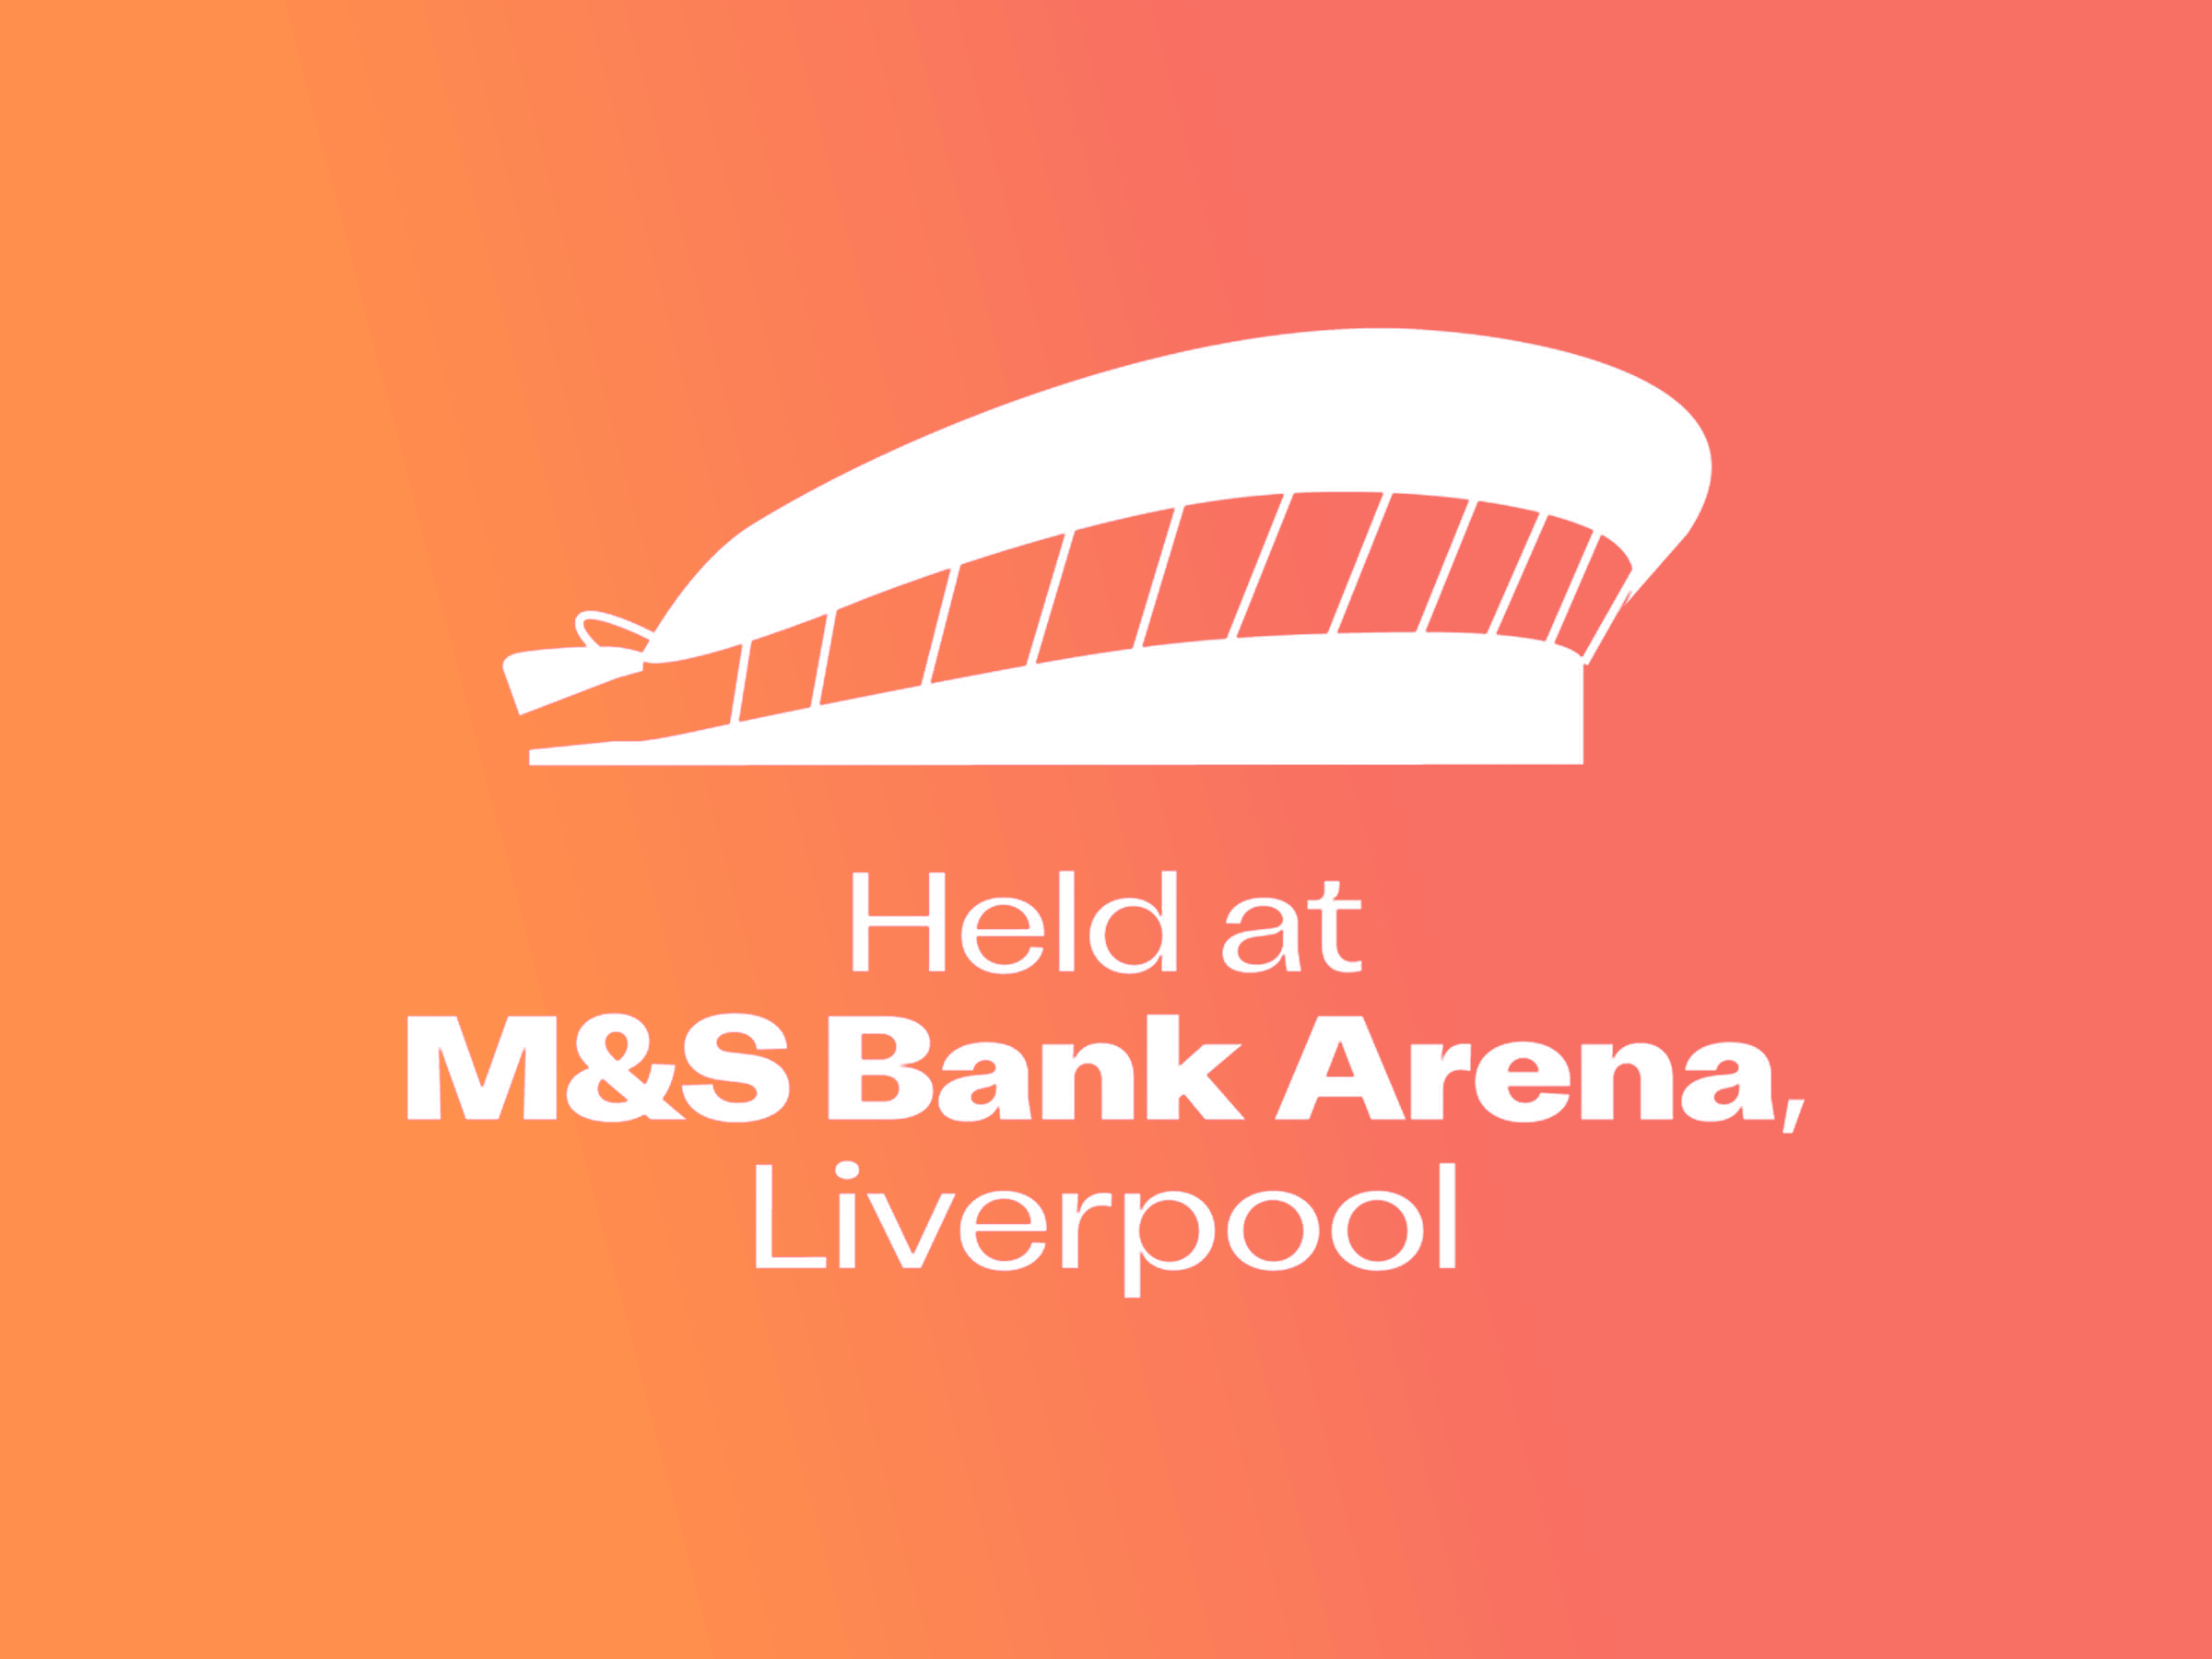 Held at M&S Bank Arena, Liverpool